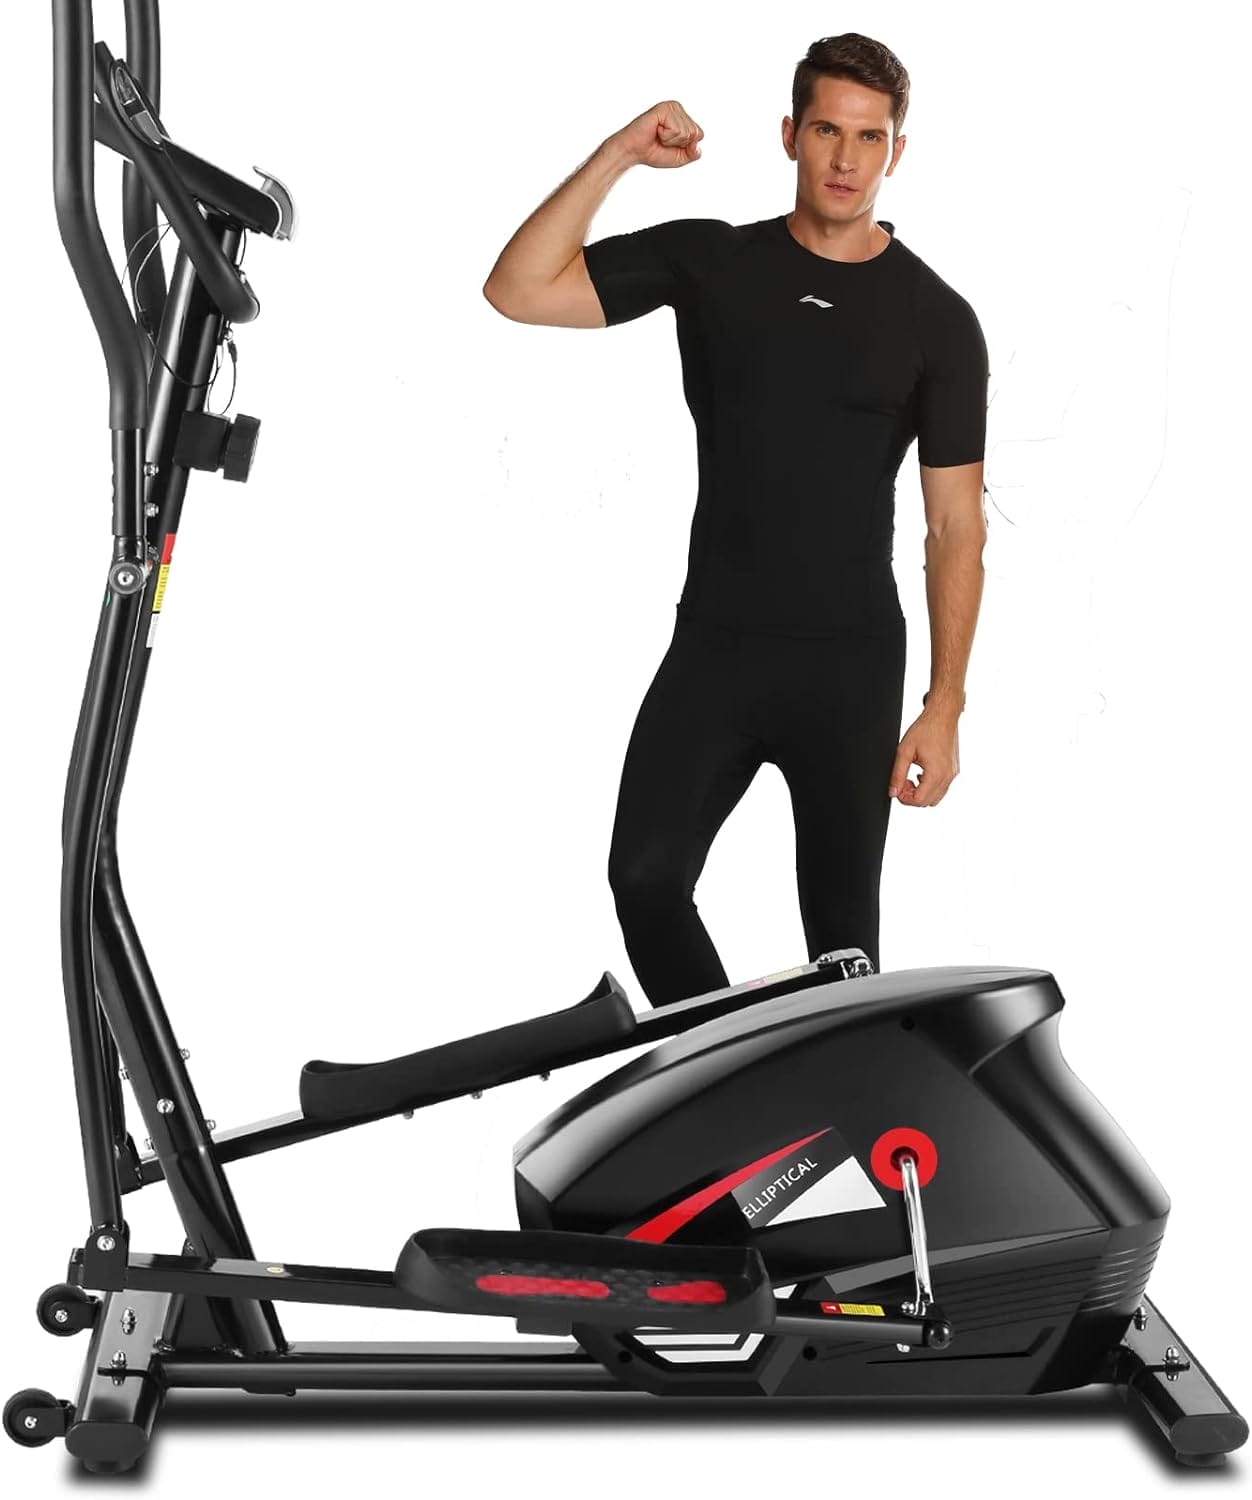 ANCHEER Elliptical Machine, Cross Trainer for Home Gym